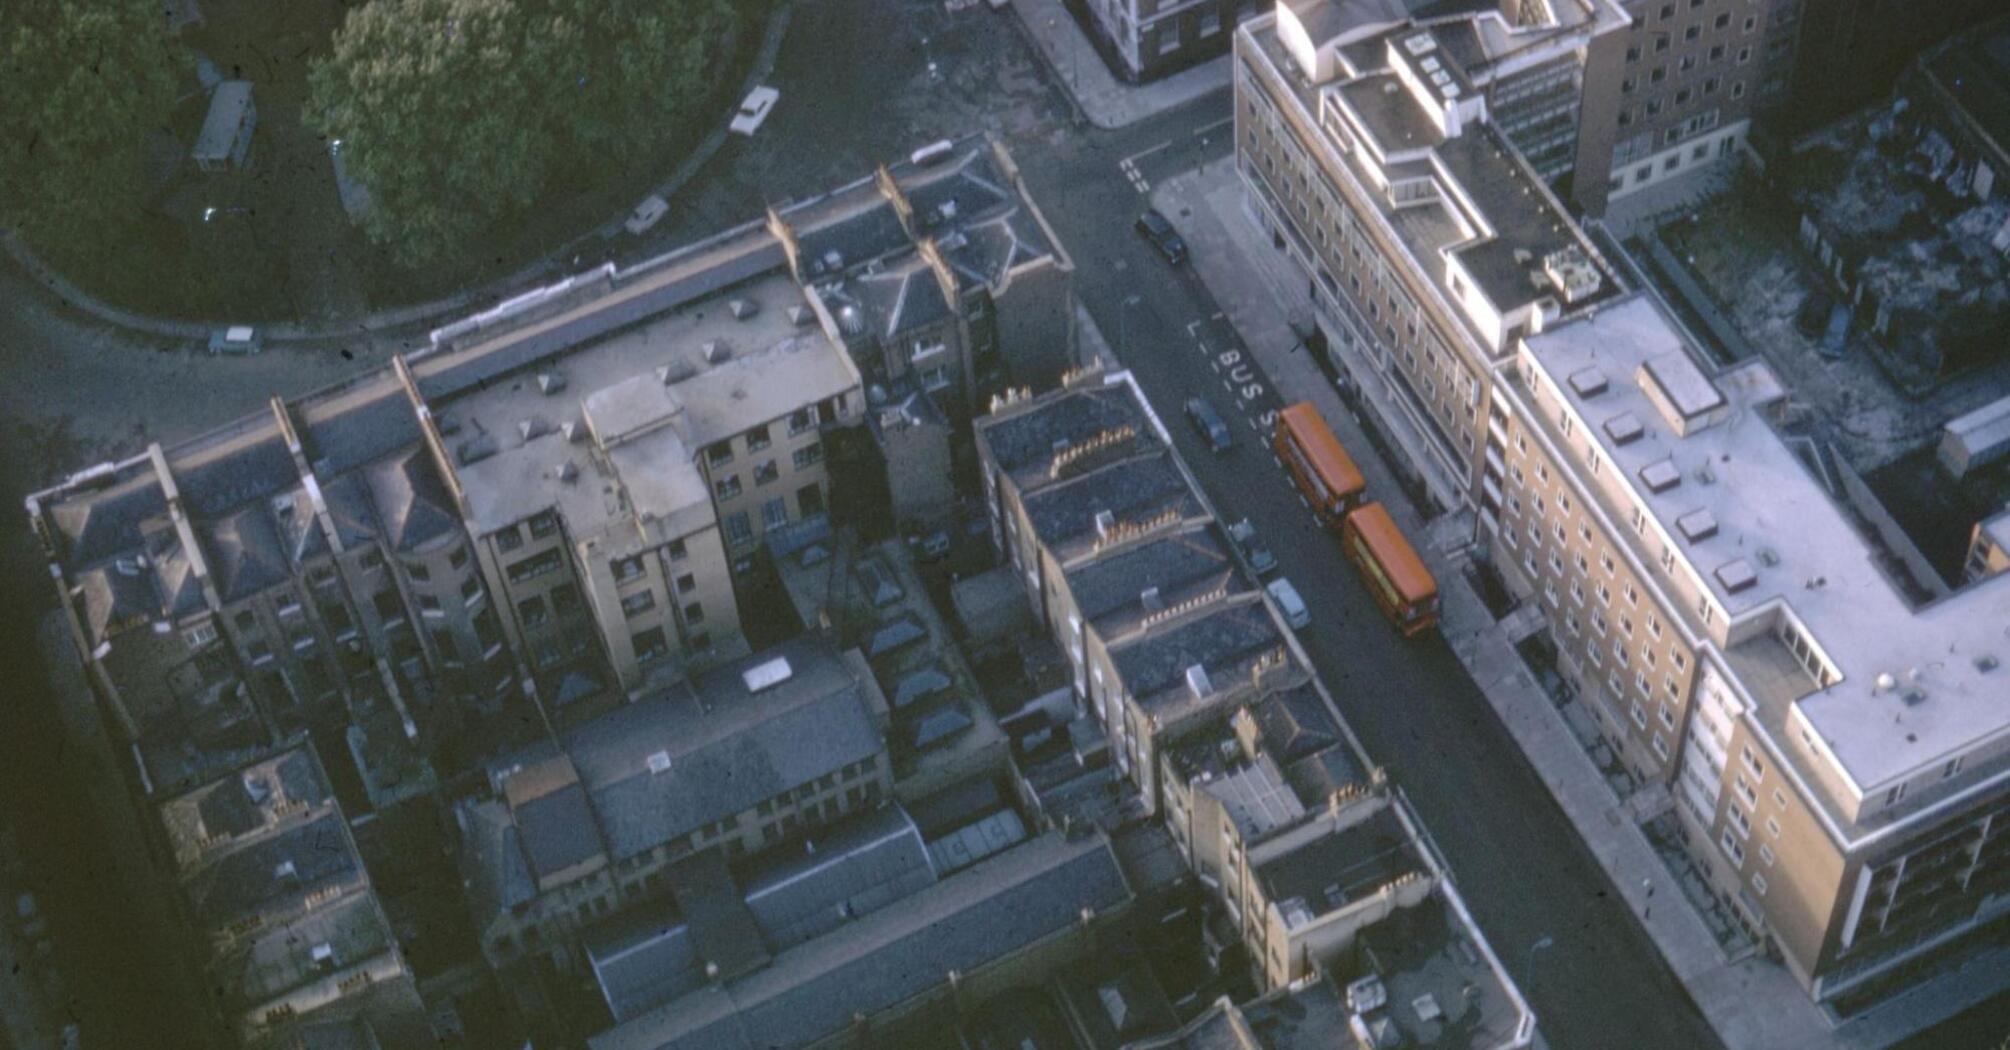 Aerial view of a London street with buses and buildings